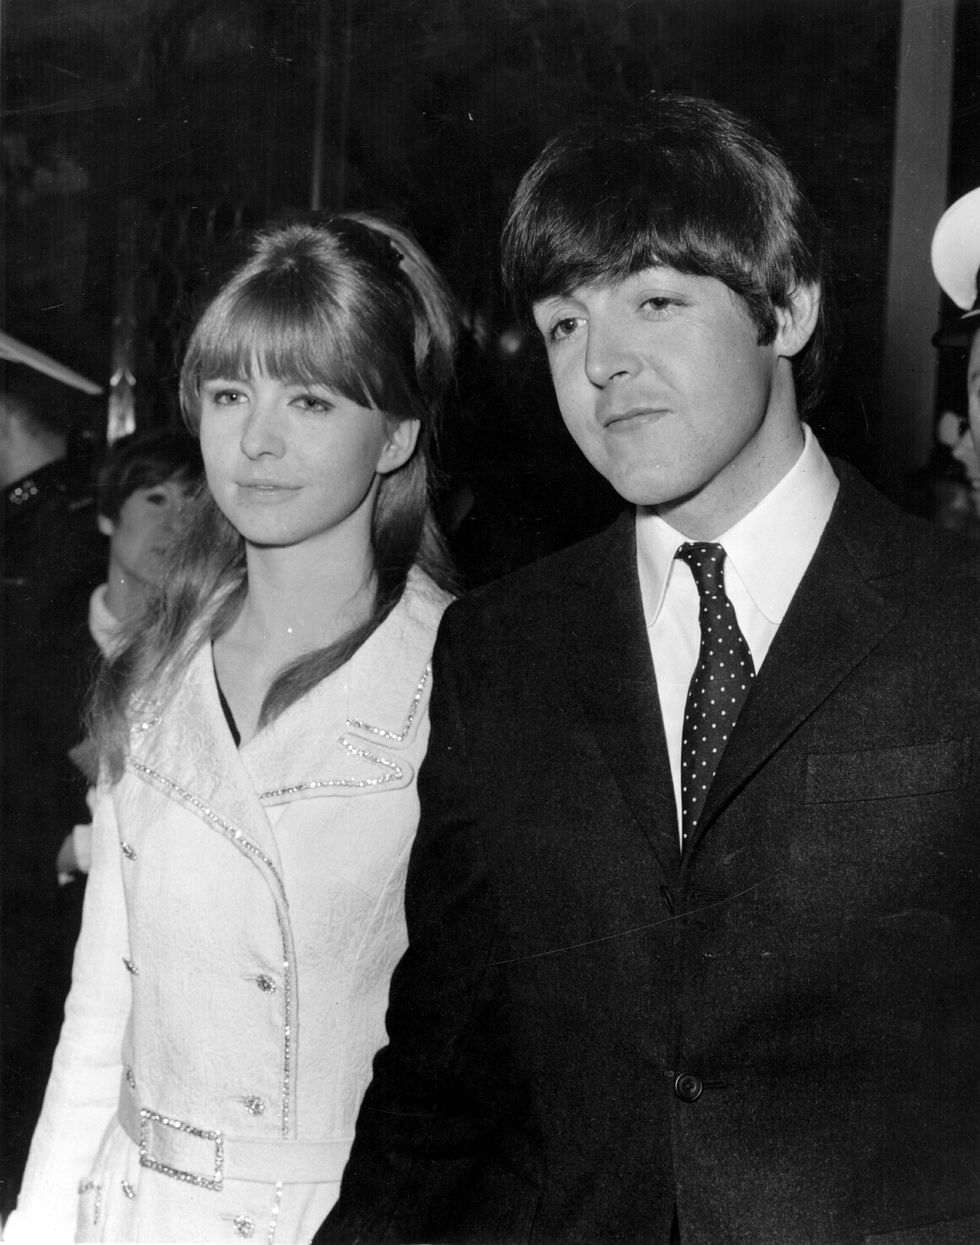 Paul McCartney and Jane Asher at the premiere of 'Alfie' at the Plaza Theatre, London on March 25, 1966